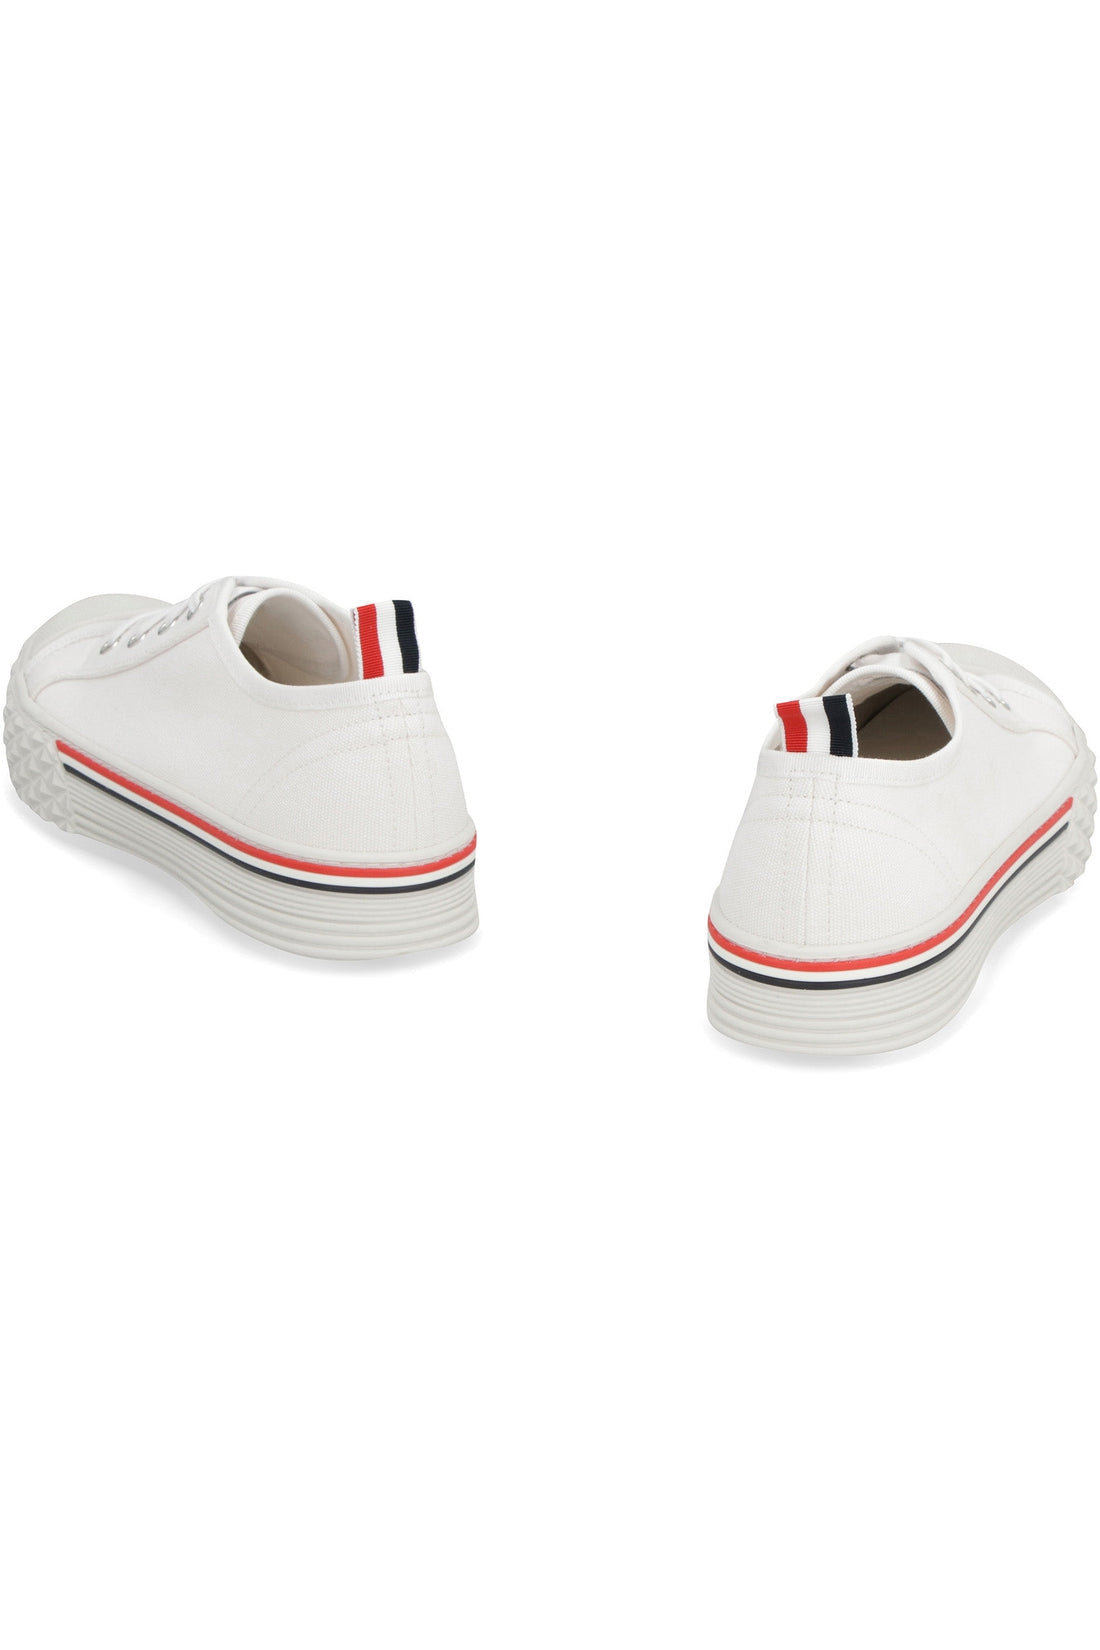 Thom Browne-OUTLET-SALE-Collegiate canvas low-top sneakers-ARCHIVIST